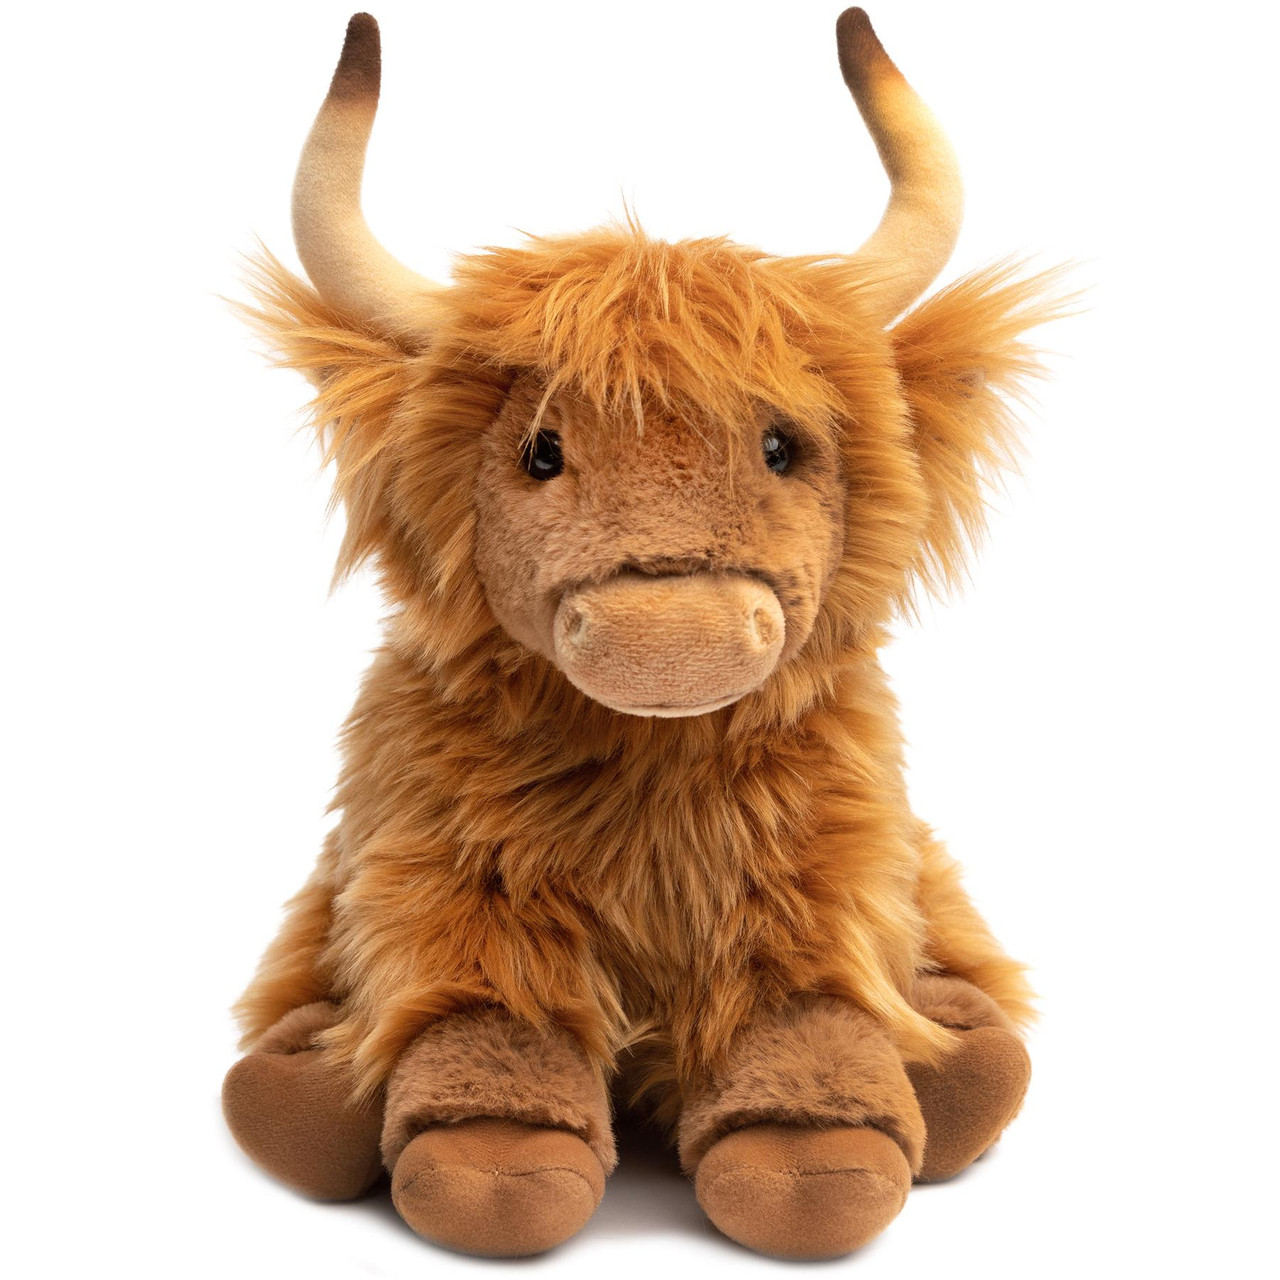 VIAHART Henley The Highland Cow 11.5 inch Stuffed Animal Plush by Tiger Tale Toys New Edition